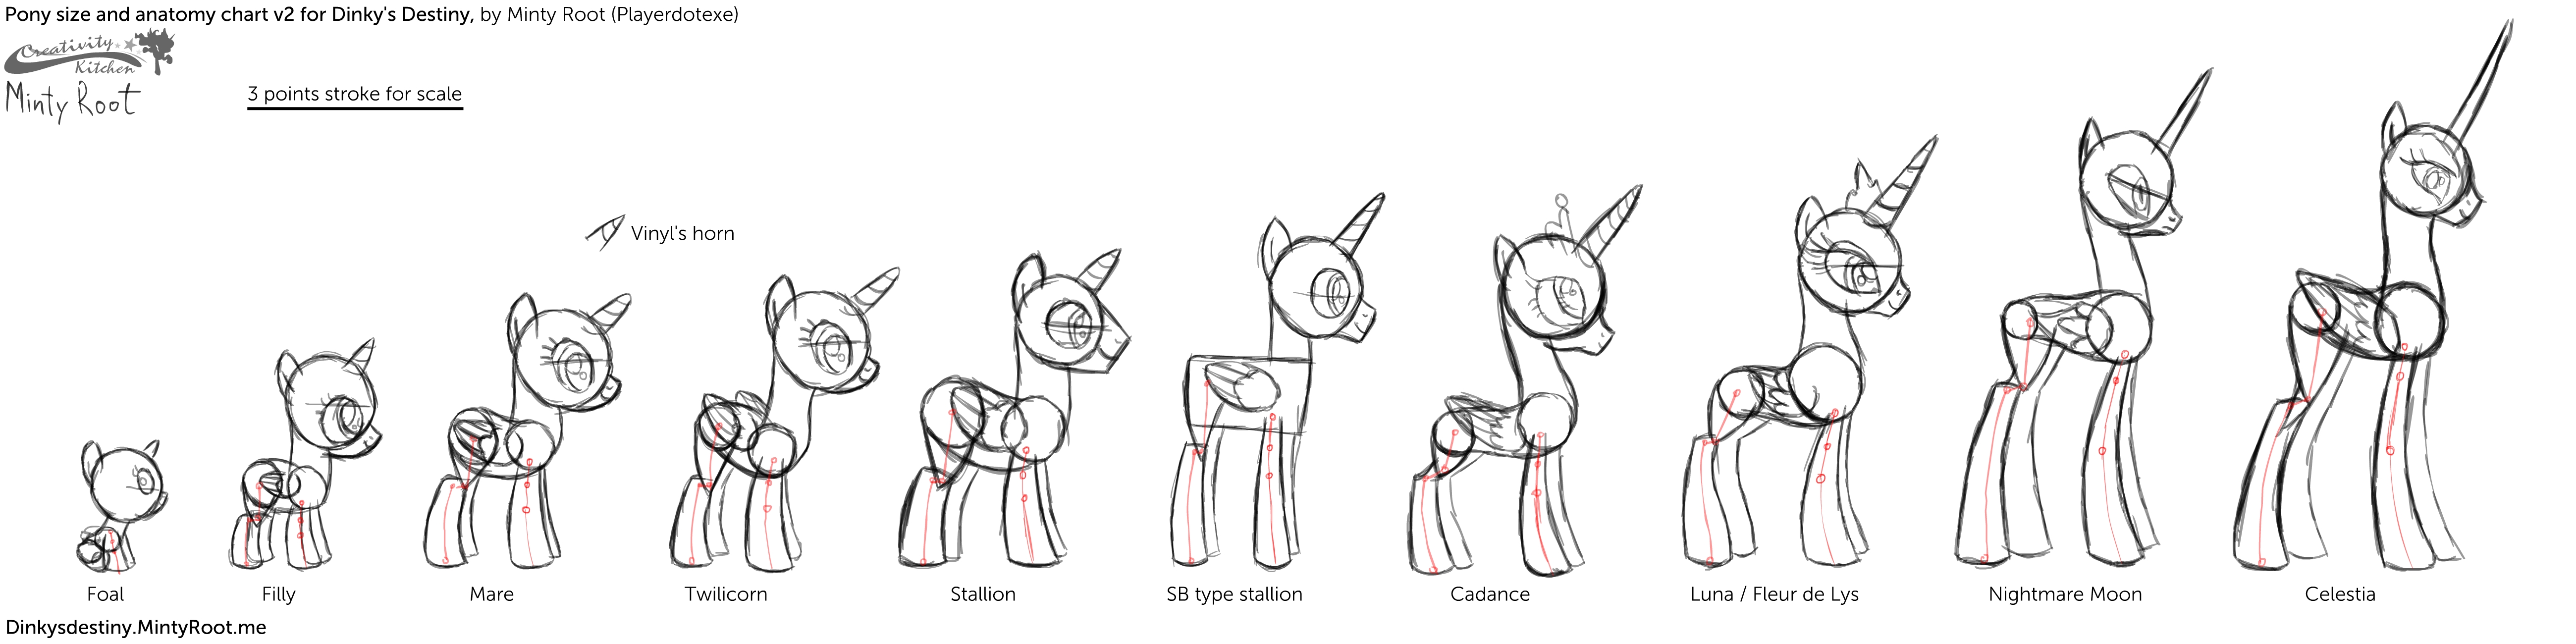 Minty Root's pony size and anatomy chart (v2) by MintyRoot on DeviantArt